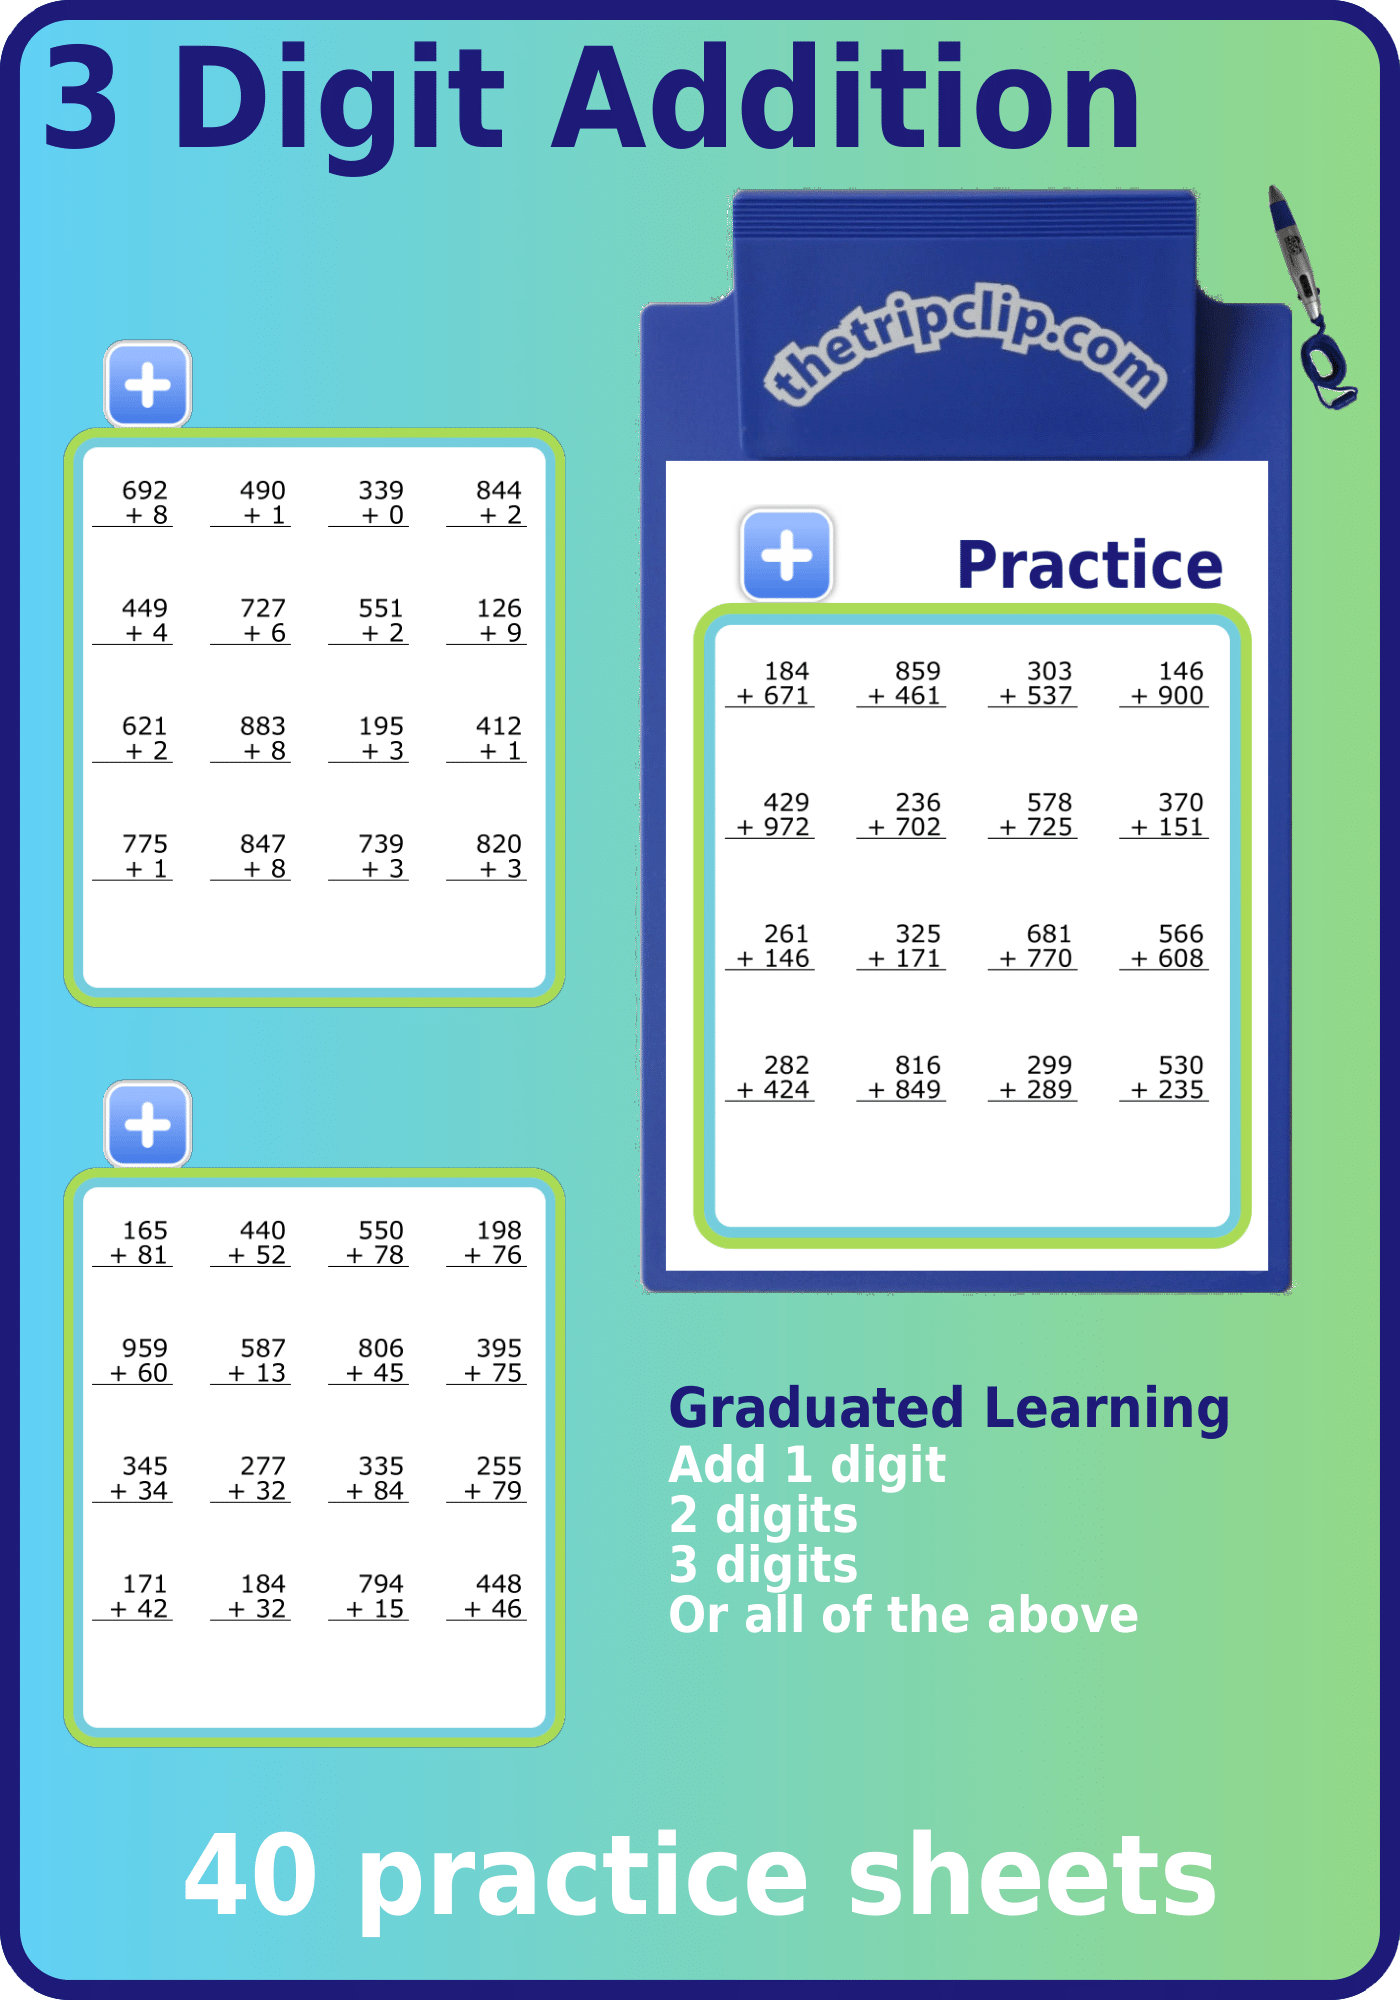 40 math practice sheets adding 1, 2, and 3 digit numbers to 3 digit numbers